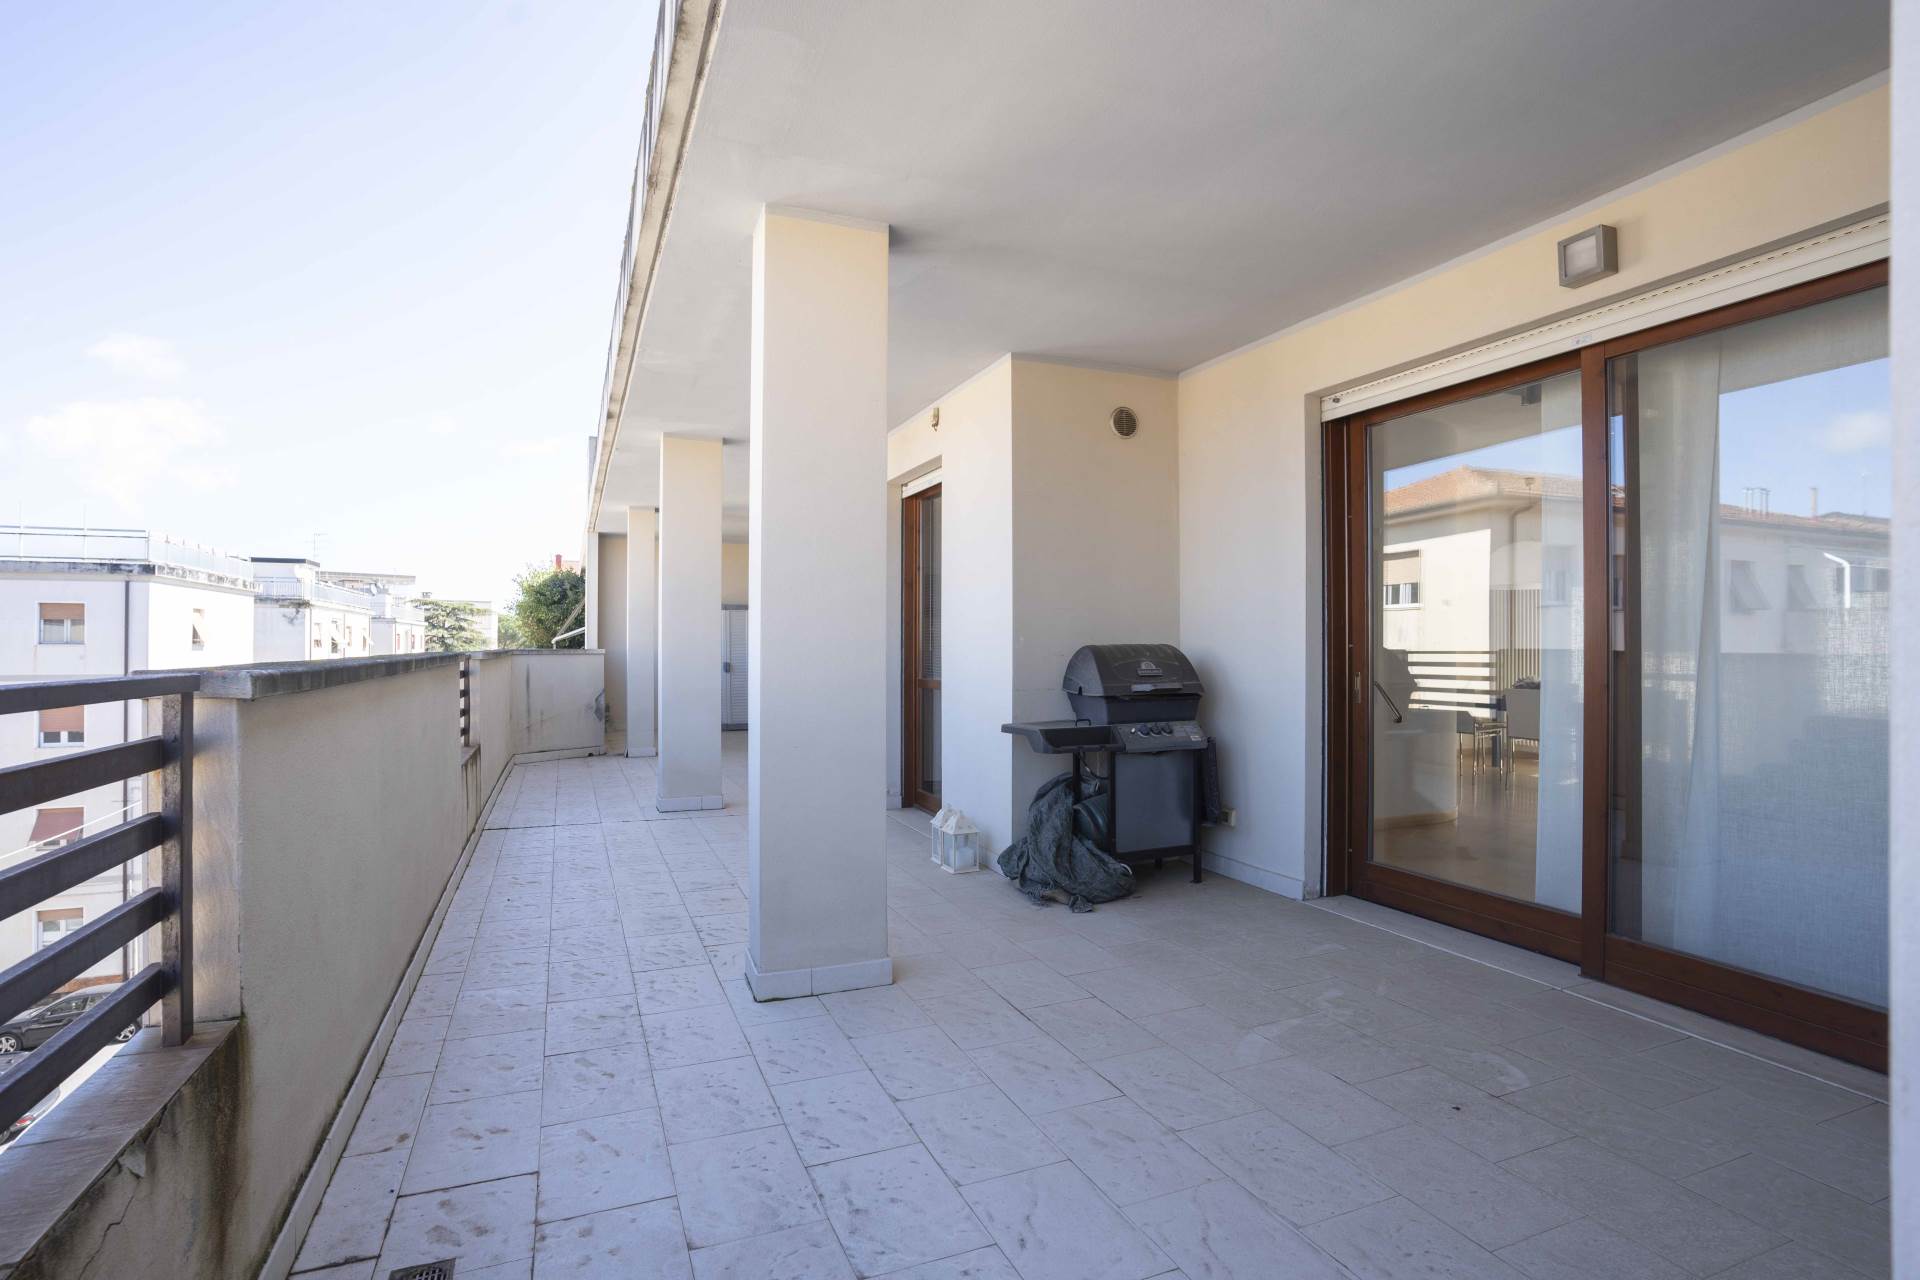 CENTRO CITTÀ, GROSSETO, Penthouse for sale of 139 Sq. mt., Almost new, Heating Individual heating system, Energetic class: D, composed by: 5 Rooms, 